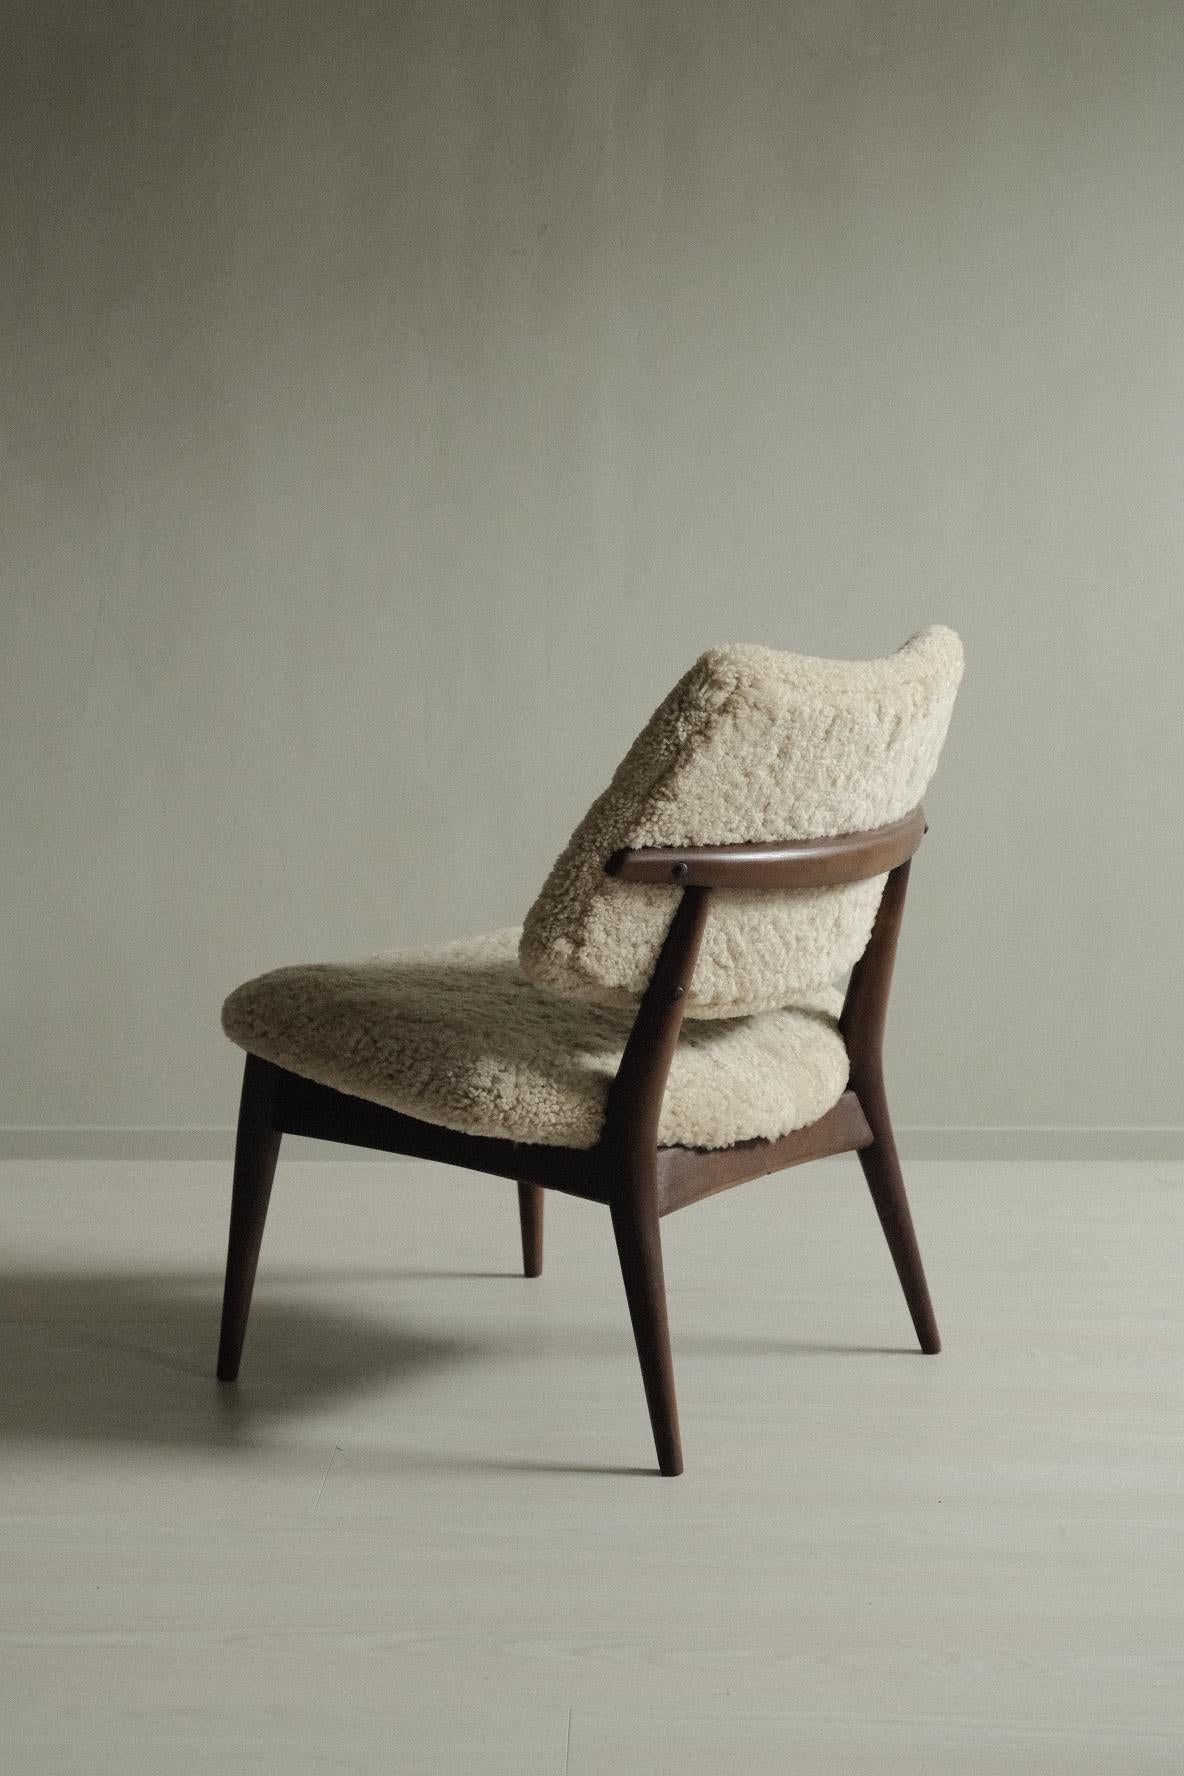 20th Century Scandinavian mid-century easy chair in shearling, produced in Norway, 1950s